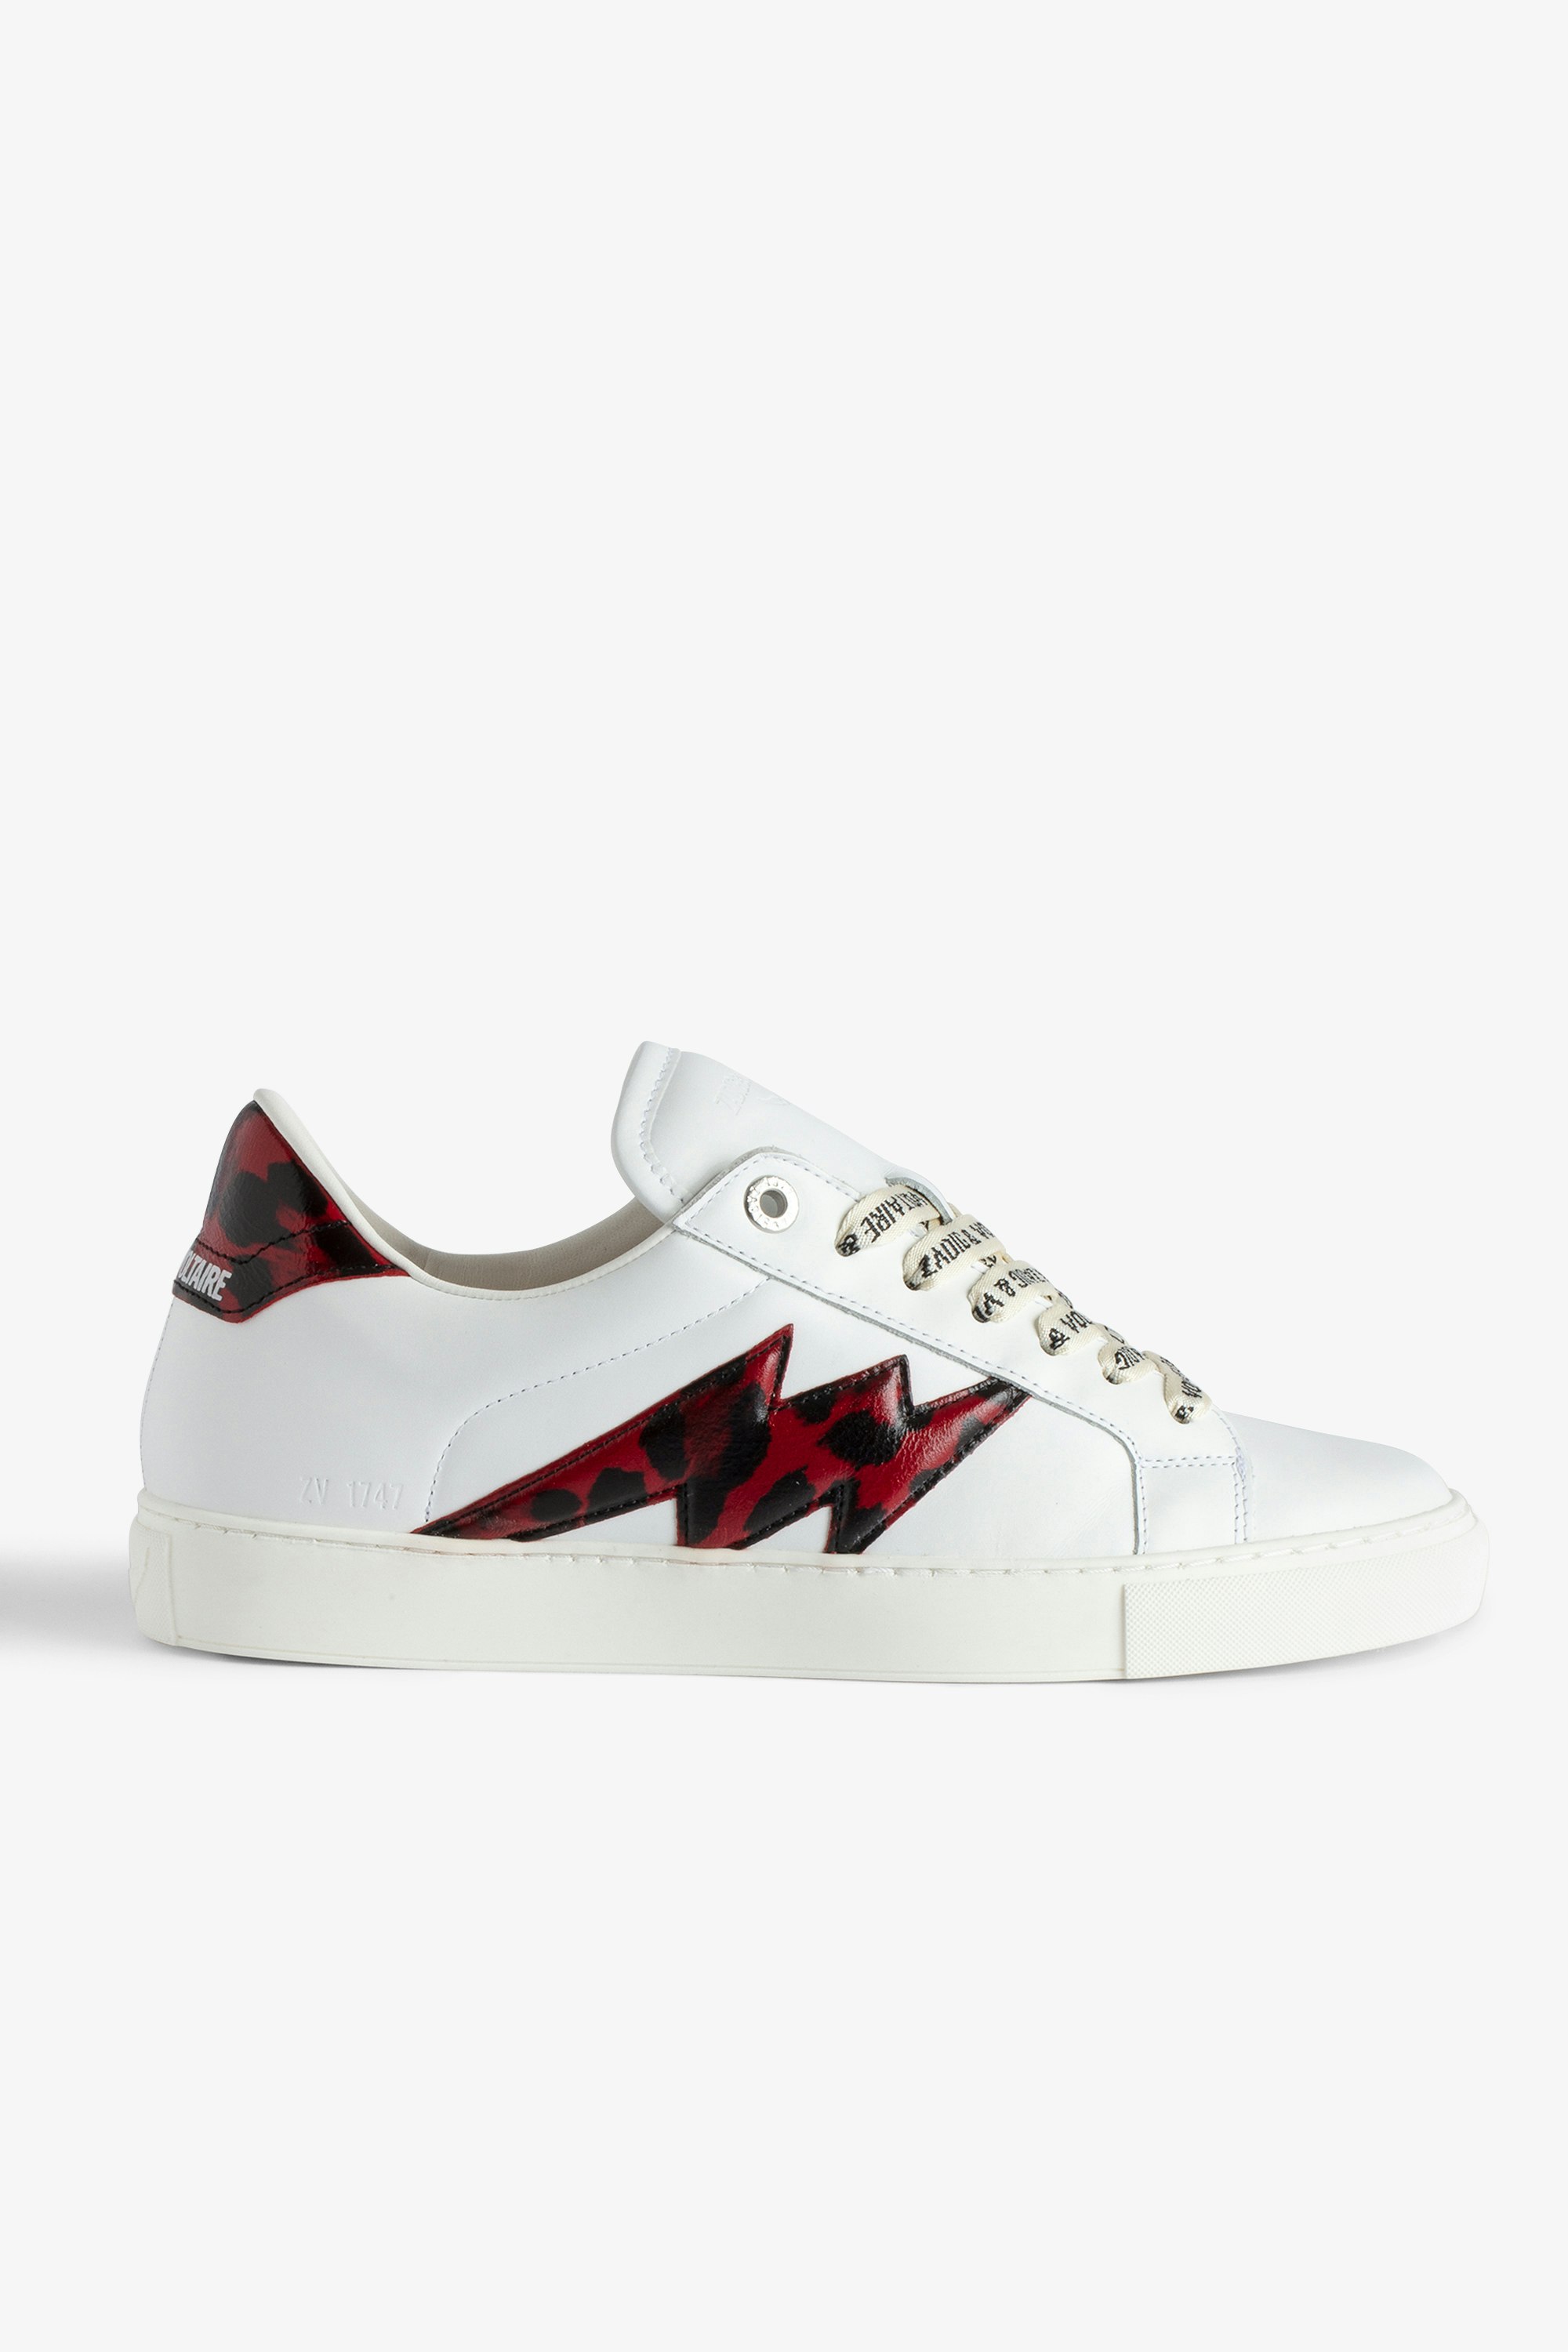 ZV1747 La Flash Low-Top Sneakers - Women’s white smooth leather low-top sneakers with lightning bolt panels and red leopard-effect reinforcement.